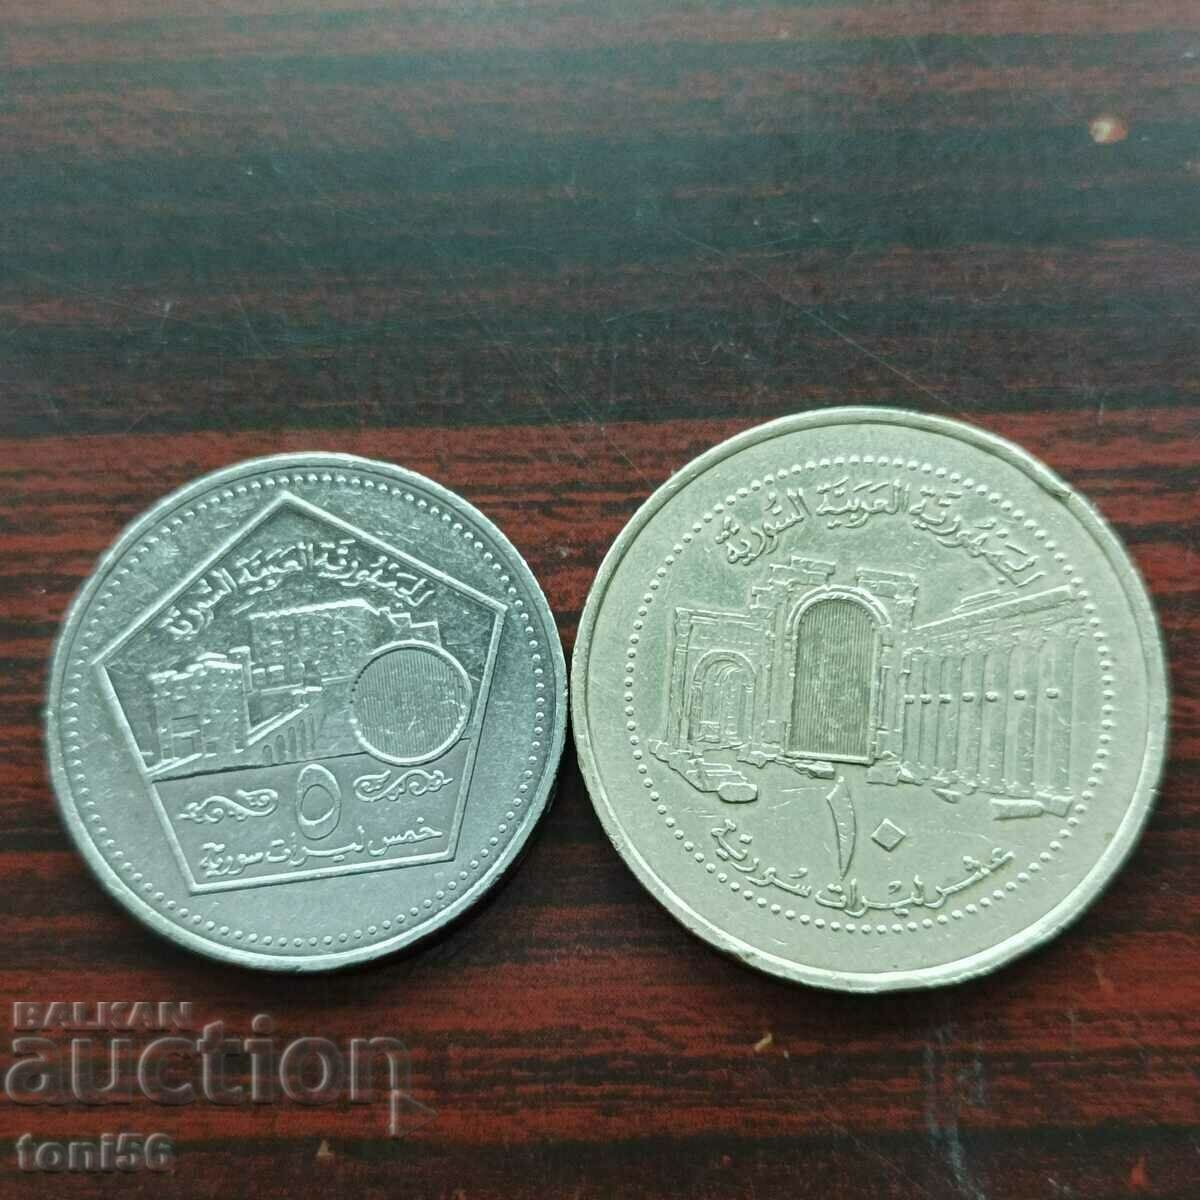 Syria 5 and 10 pounds 2003